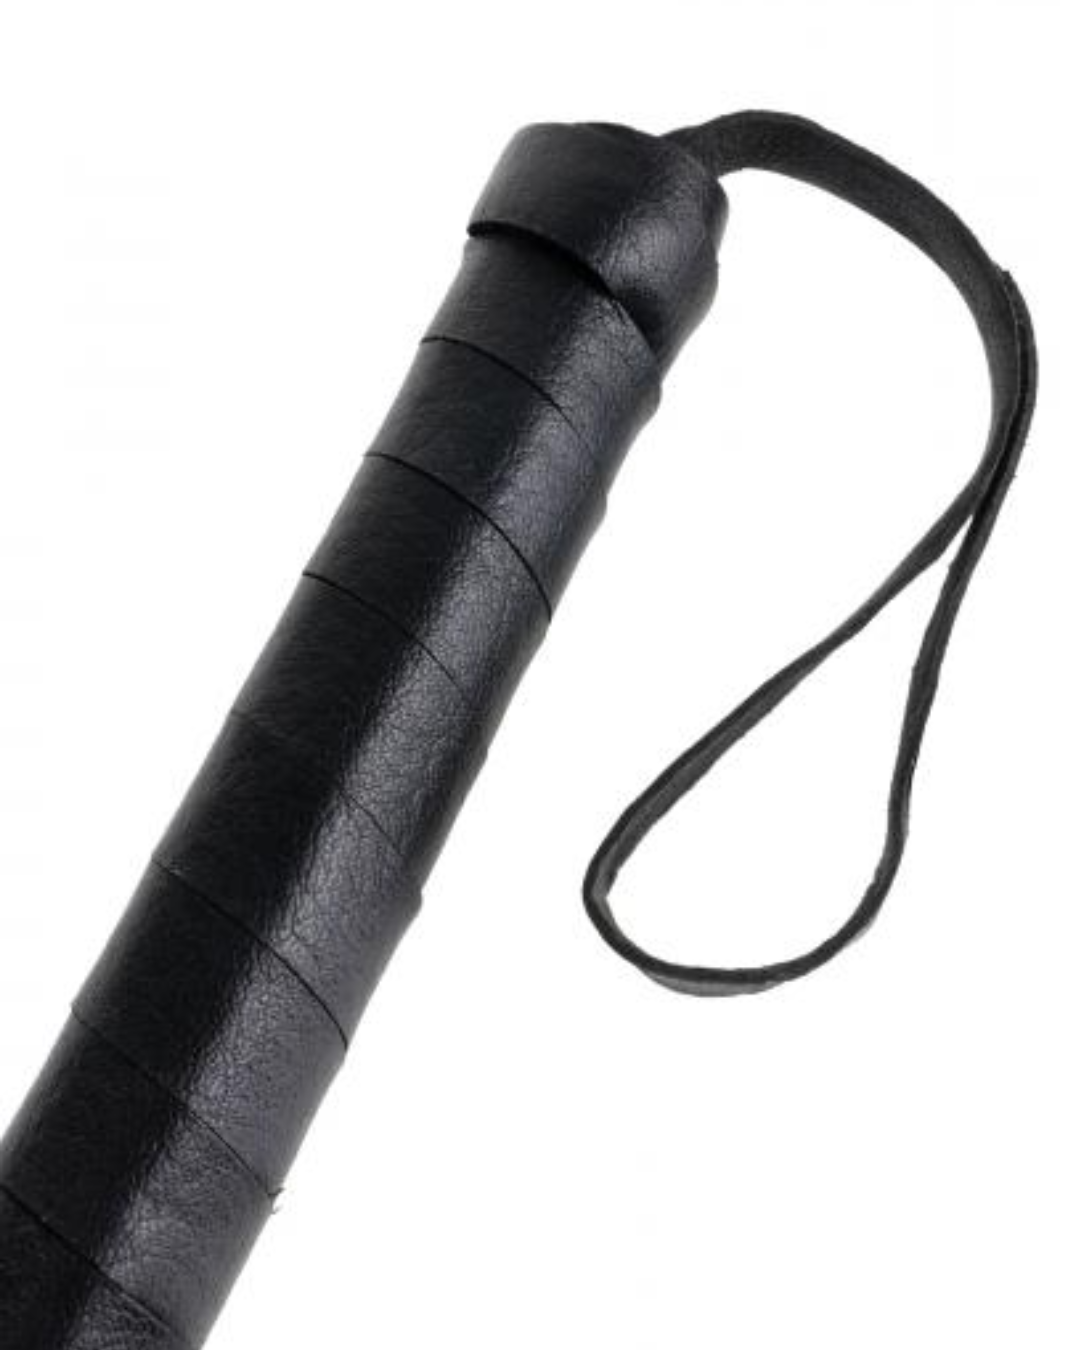 Fetish Fantasy Limited Edition Cat-O-Nine Tails Leather Whip